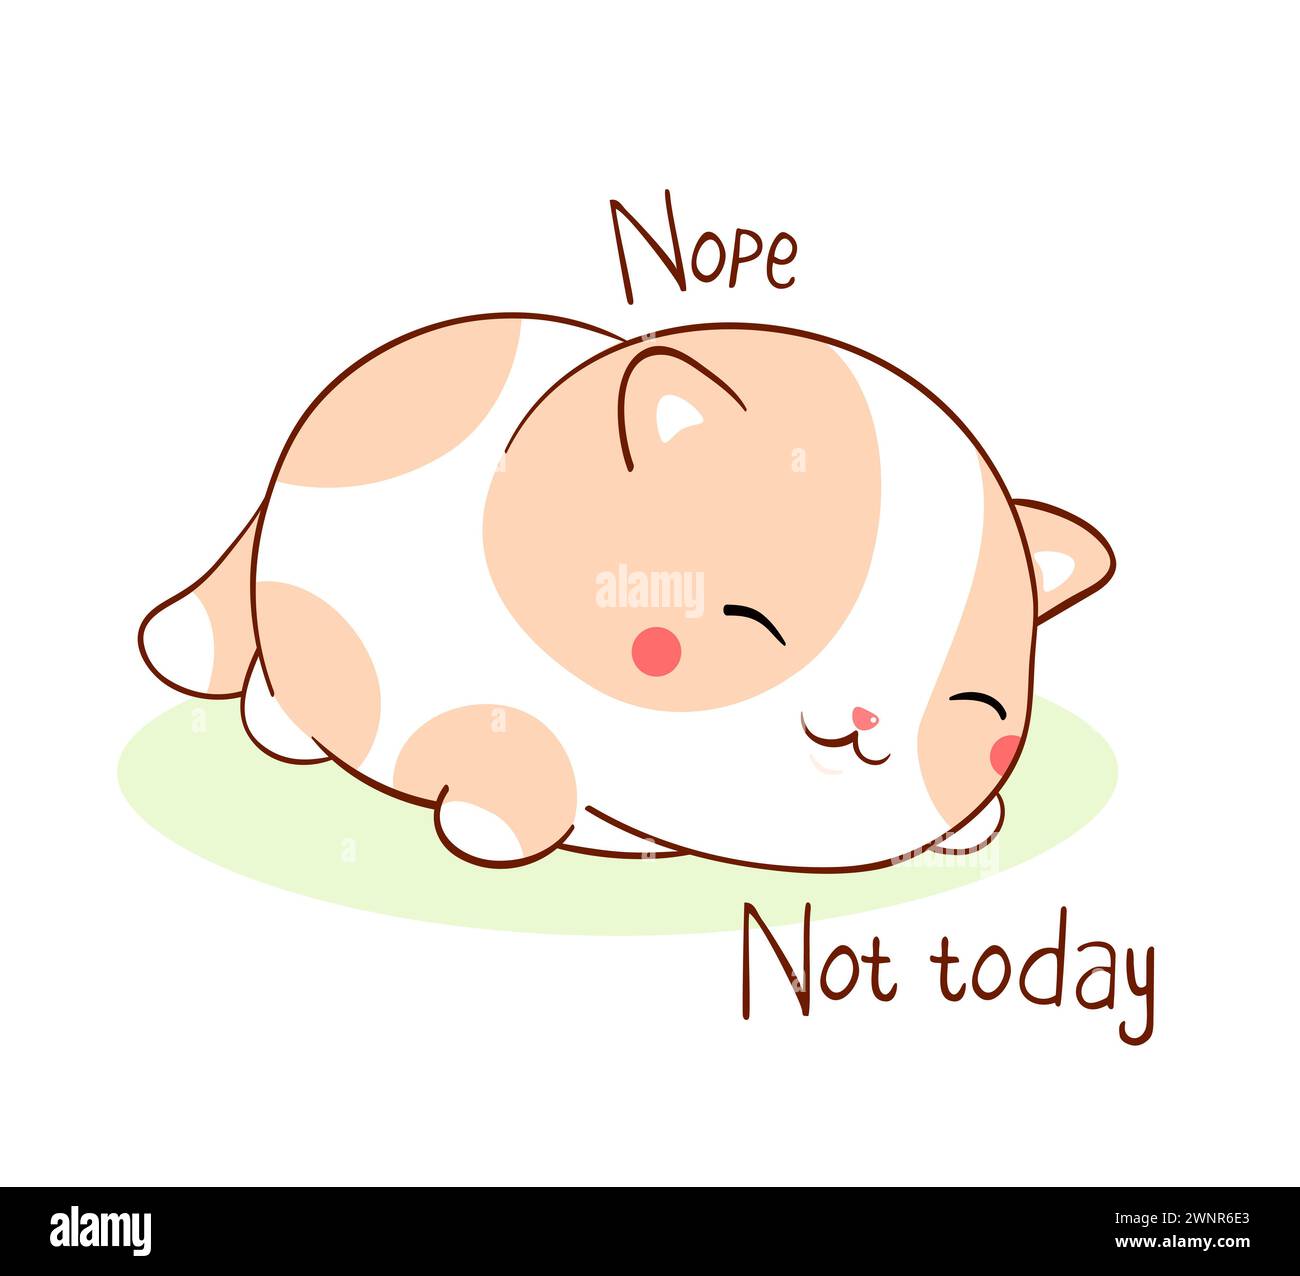 Square card with a lying lazy cat and inscription Nope Not today. Funny sleeping fat cat in kawaii style. Vector illustration EPS8 Stock Photo